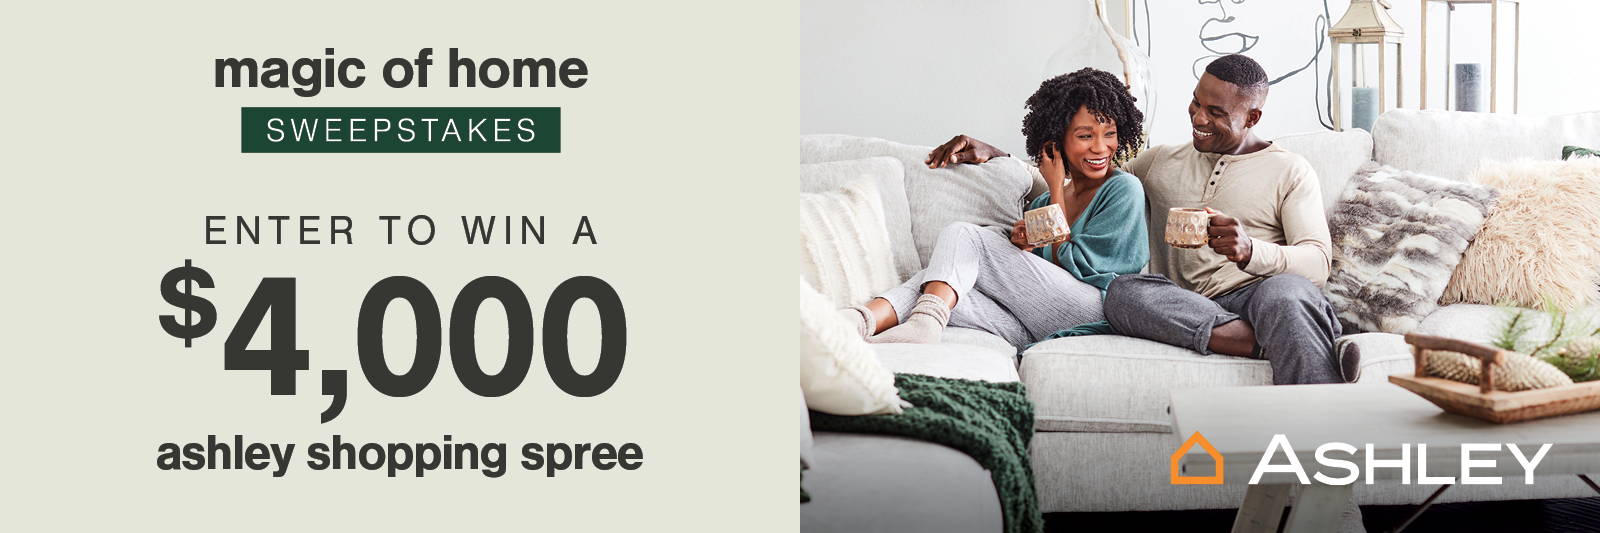 magic of home sweepstakes enter to win a $4,000 ashley shopping spree